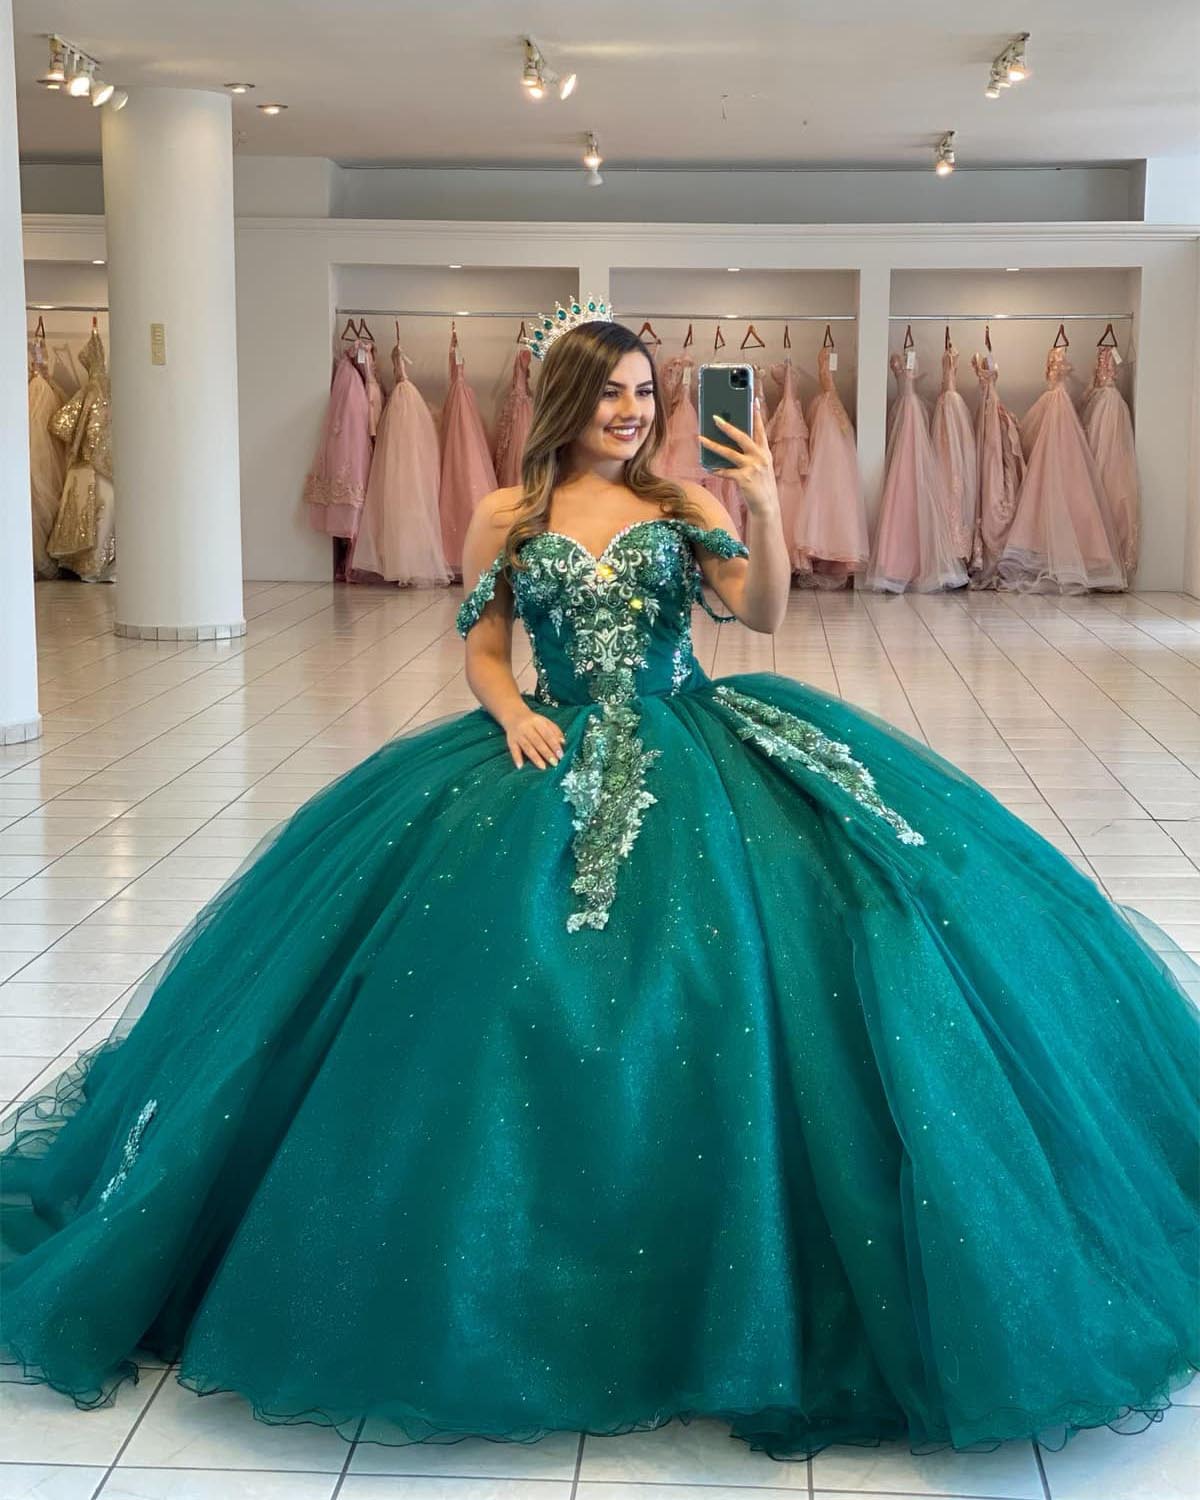 Emerald ball gown. | Green wedding dresses, Lace ball gowns, Ball gowns